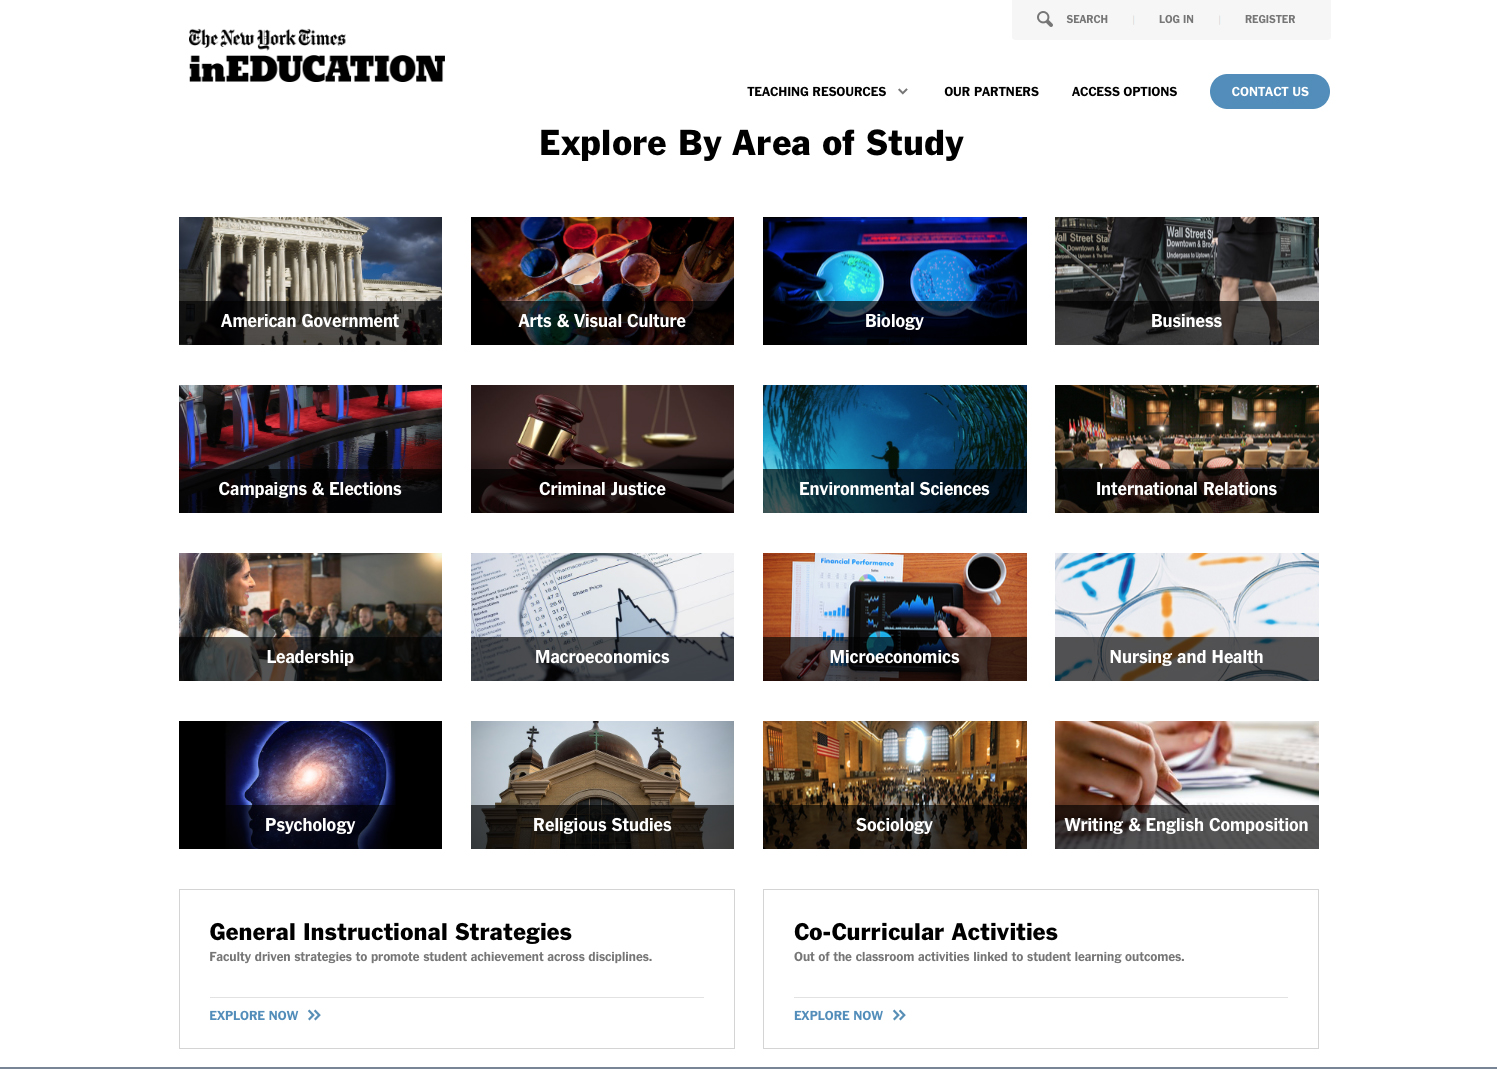 Welcome page of NYTimes inEducation website